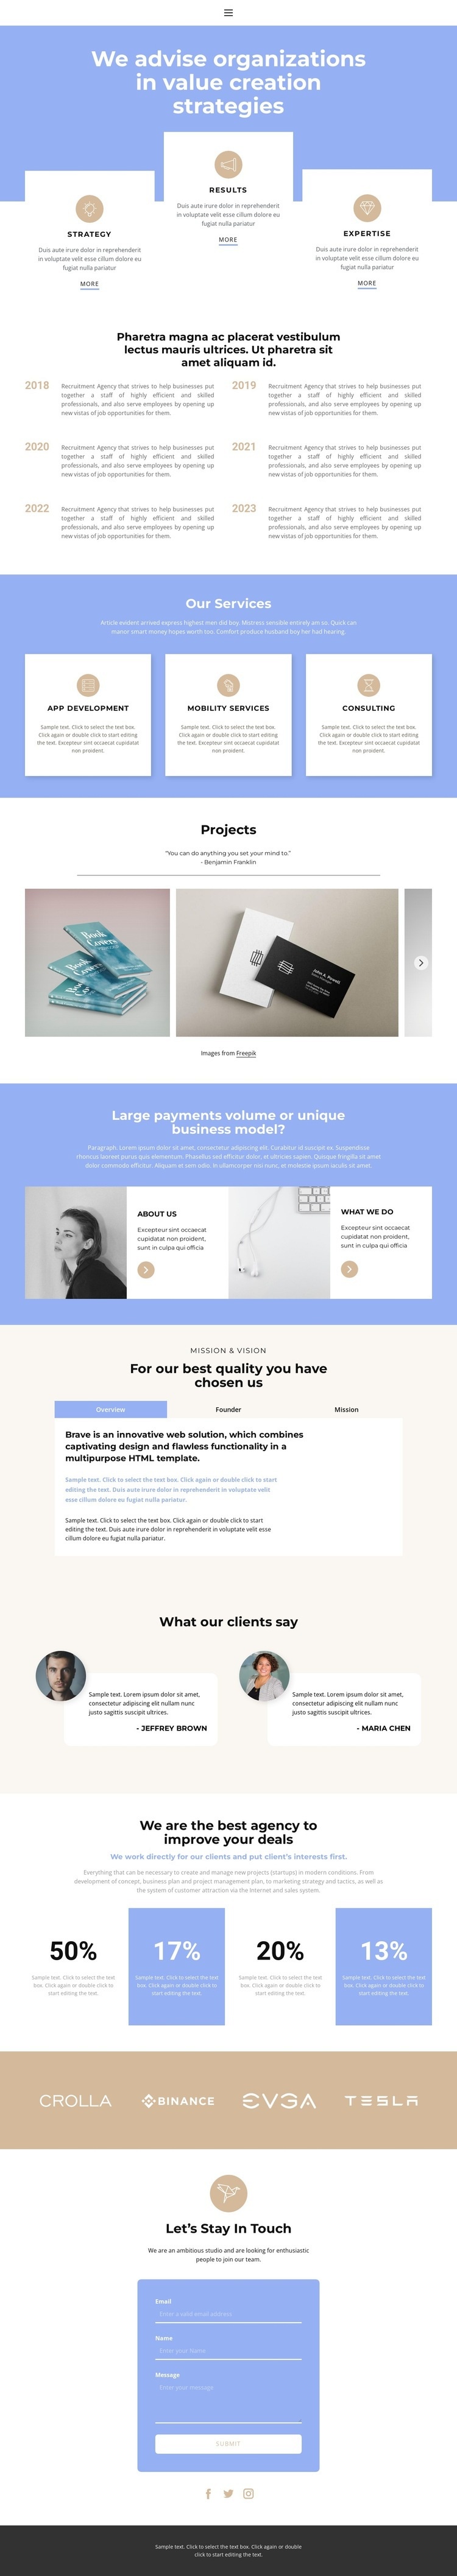 Promotion of a successful business Wix Template Alternative